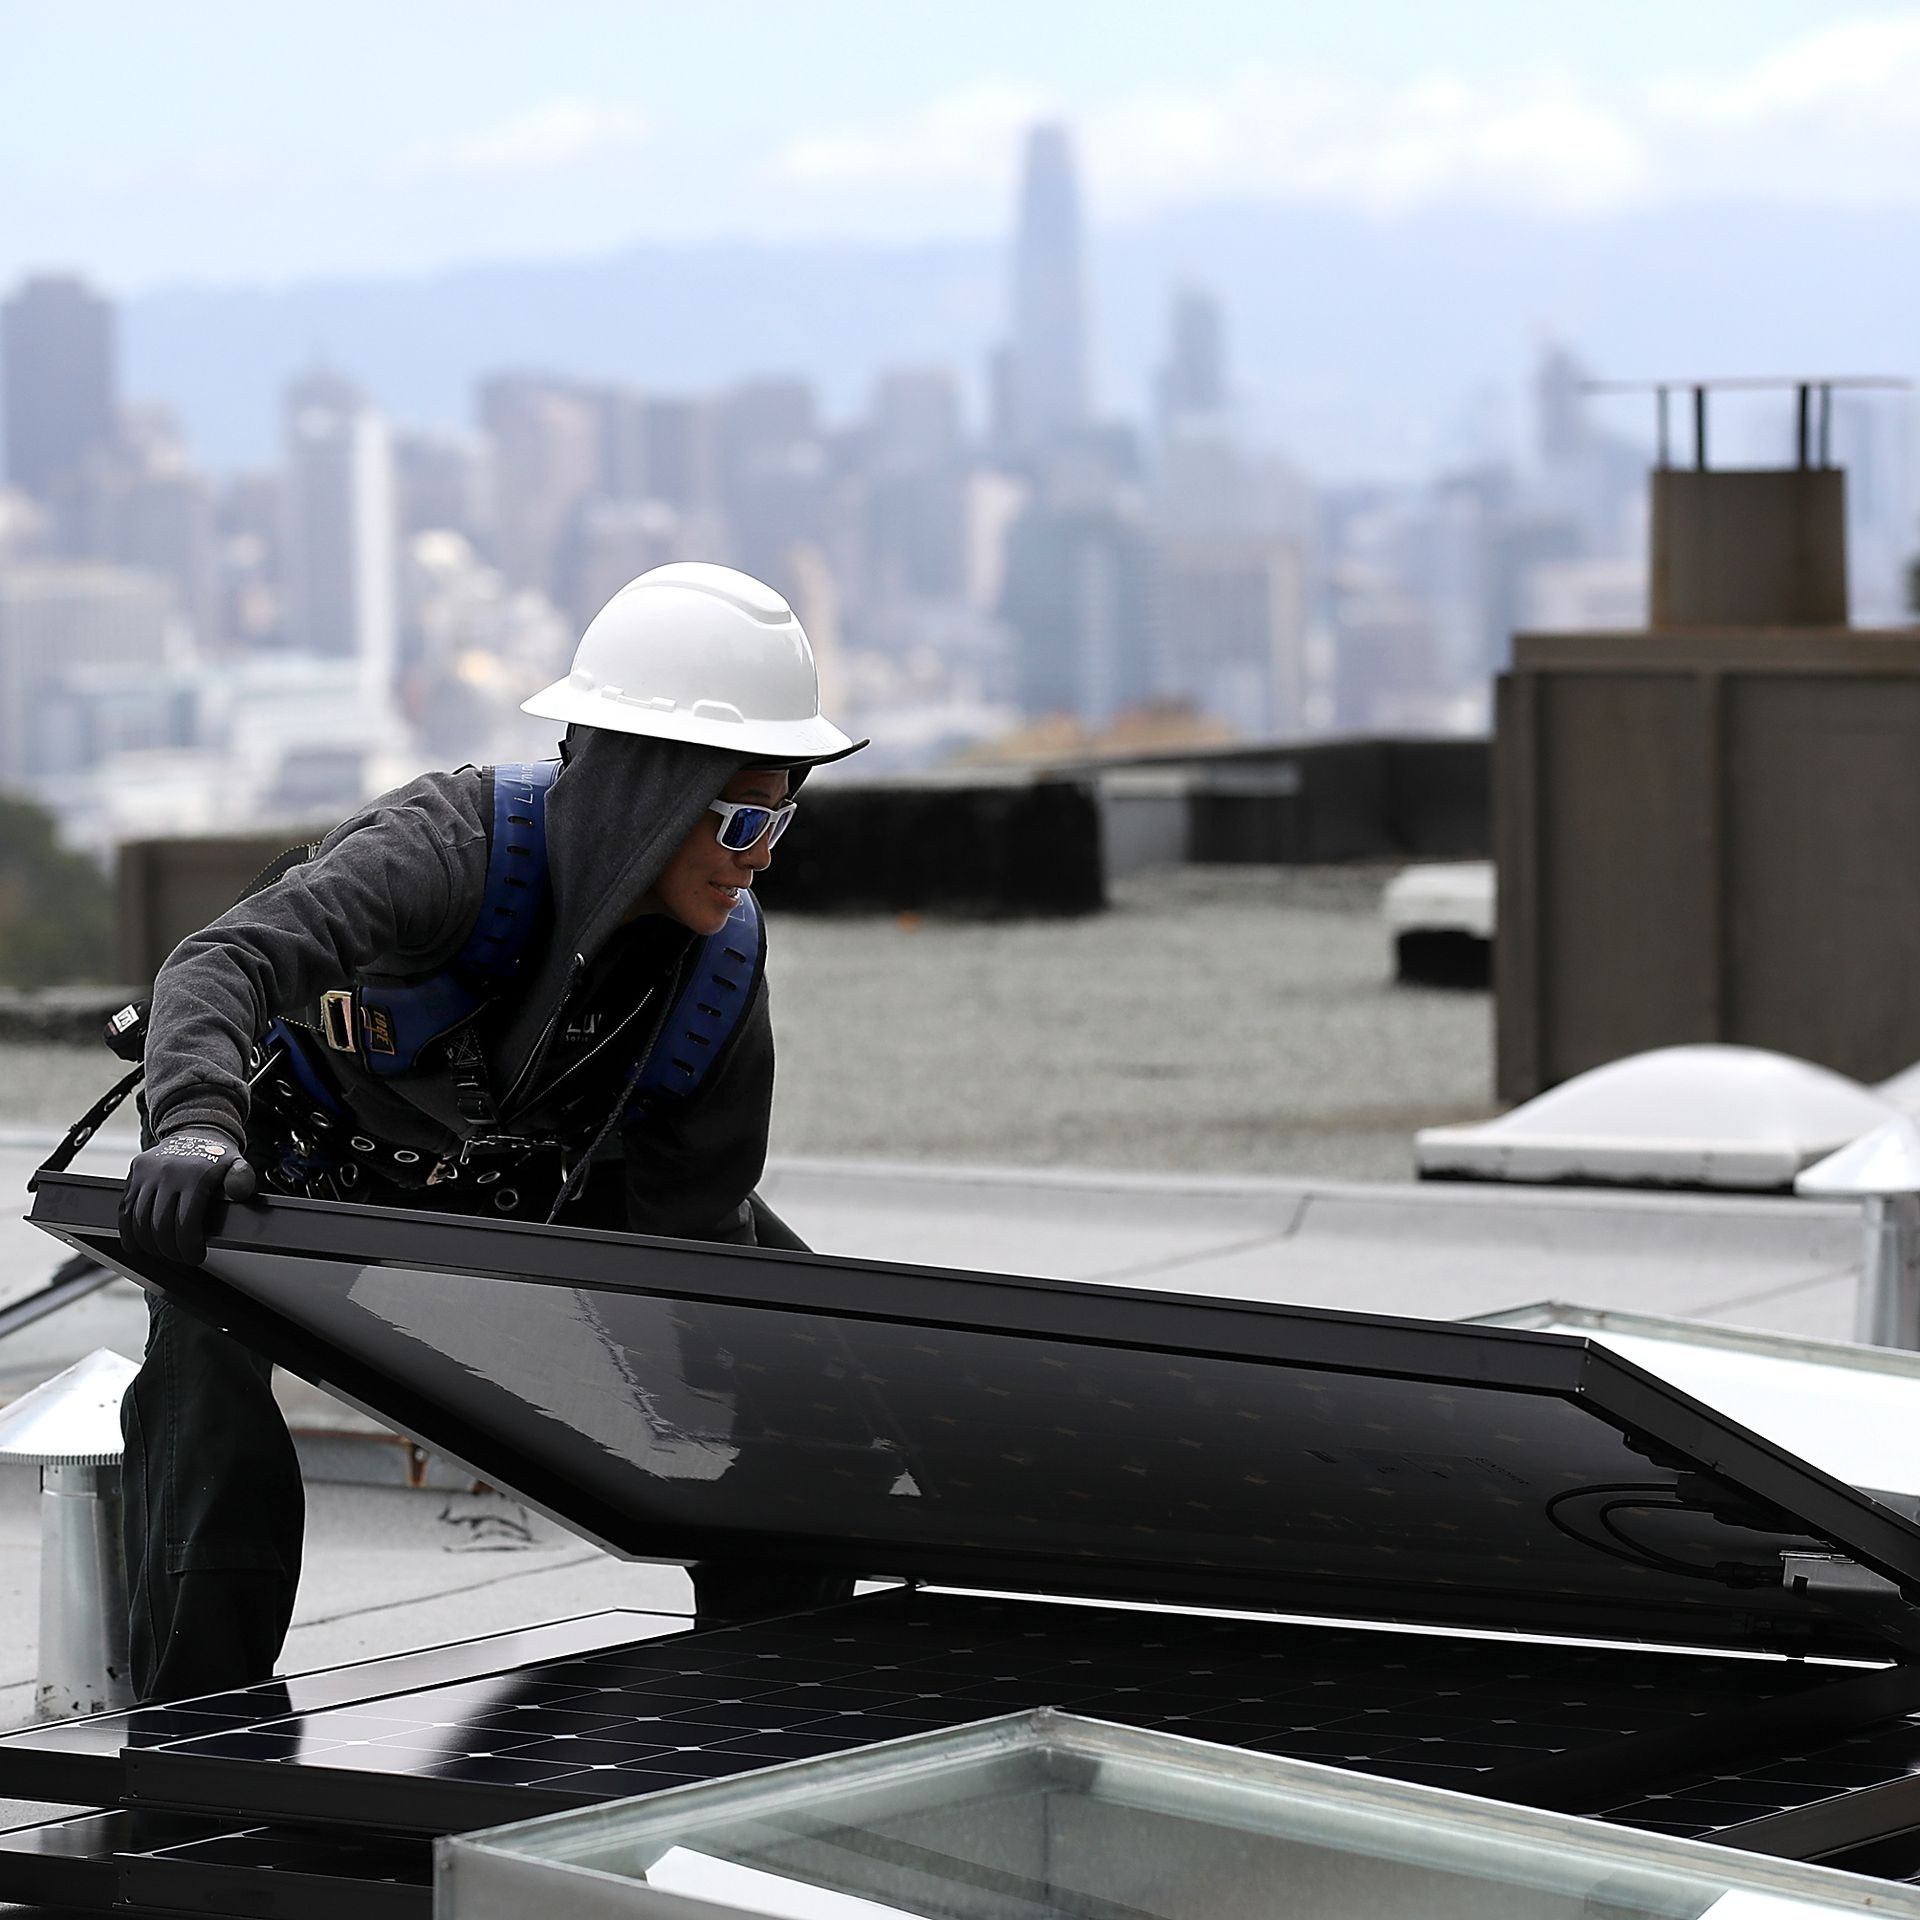 Luminalt solar installers Pam Quan moves a solar panel during an istallation on the roof of a home on May 9, 2018 in San Francisco, California.  